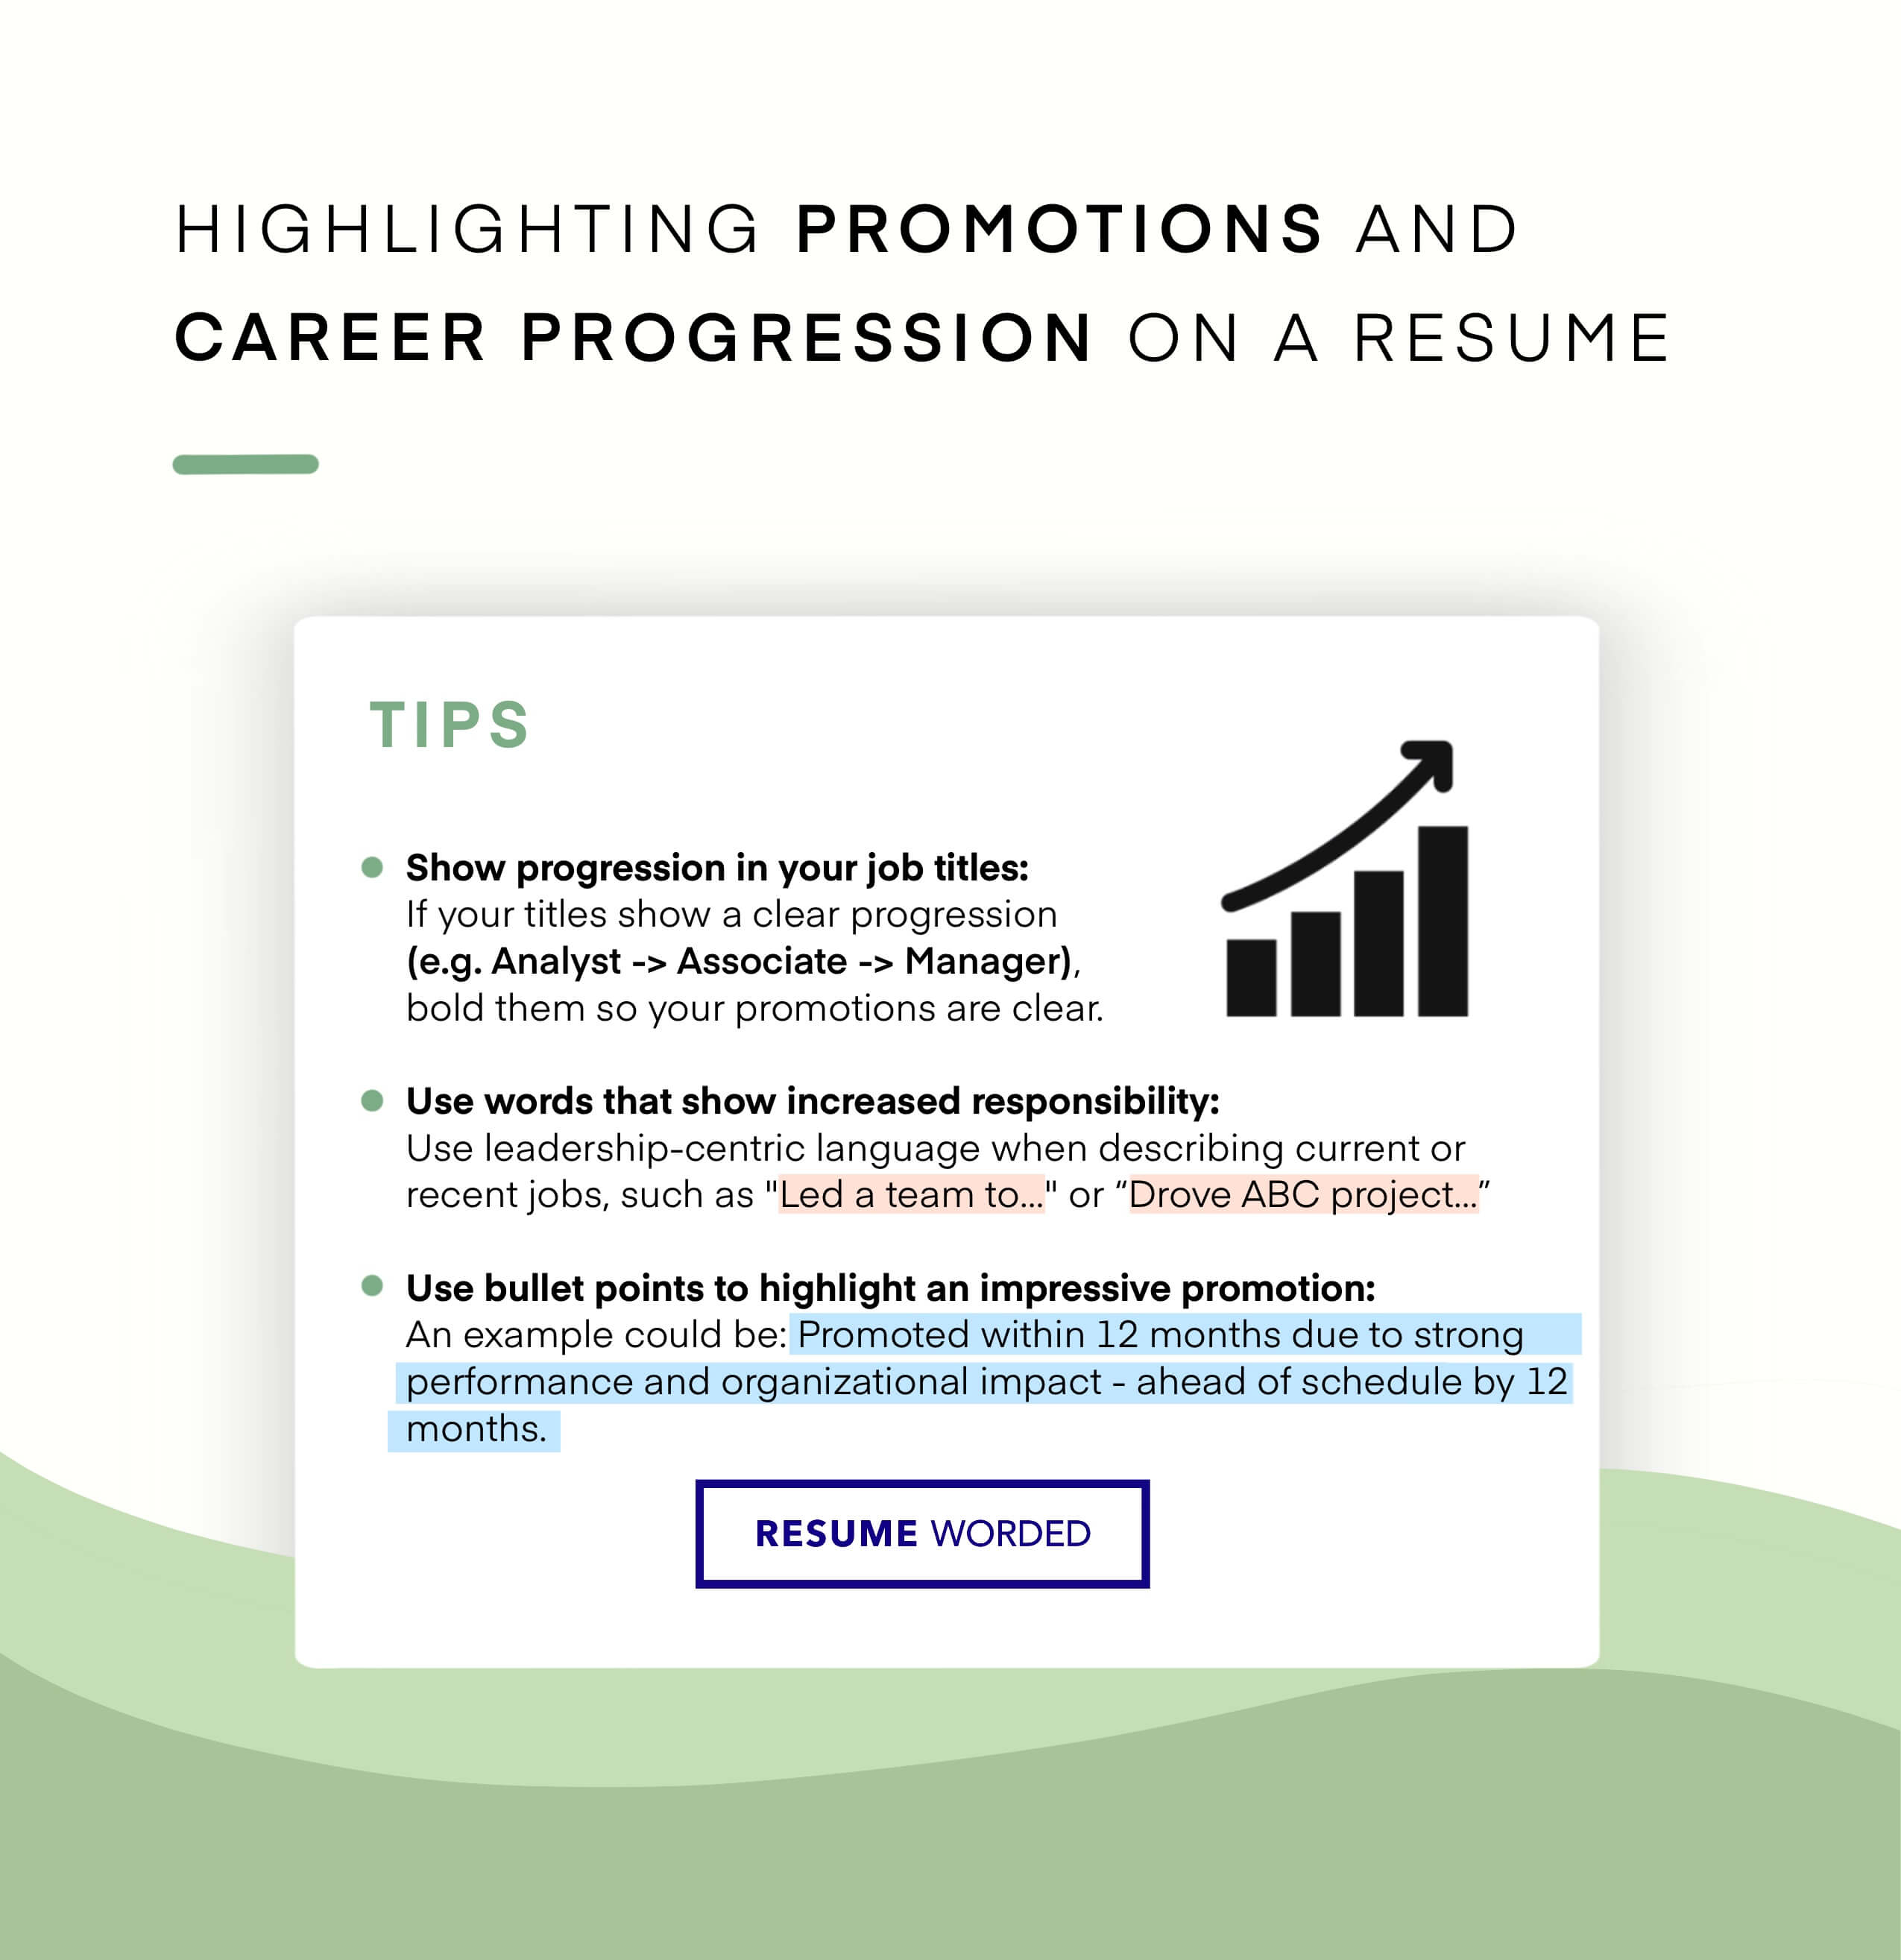 Highlight internal promotions in your company, industry or field - Print Production Manager Resume